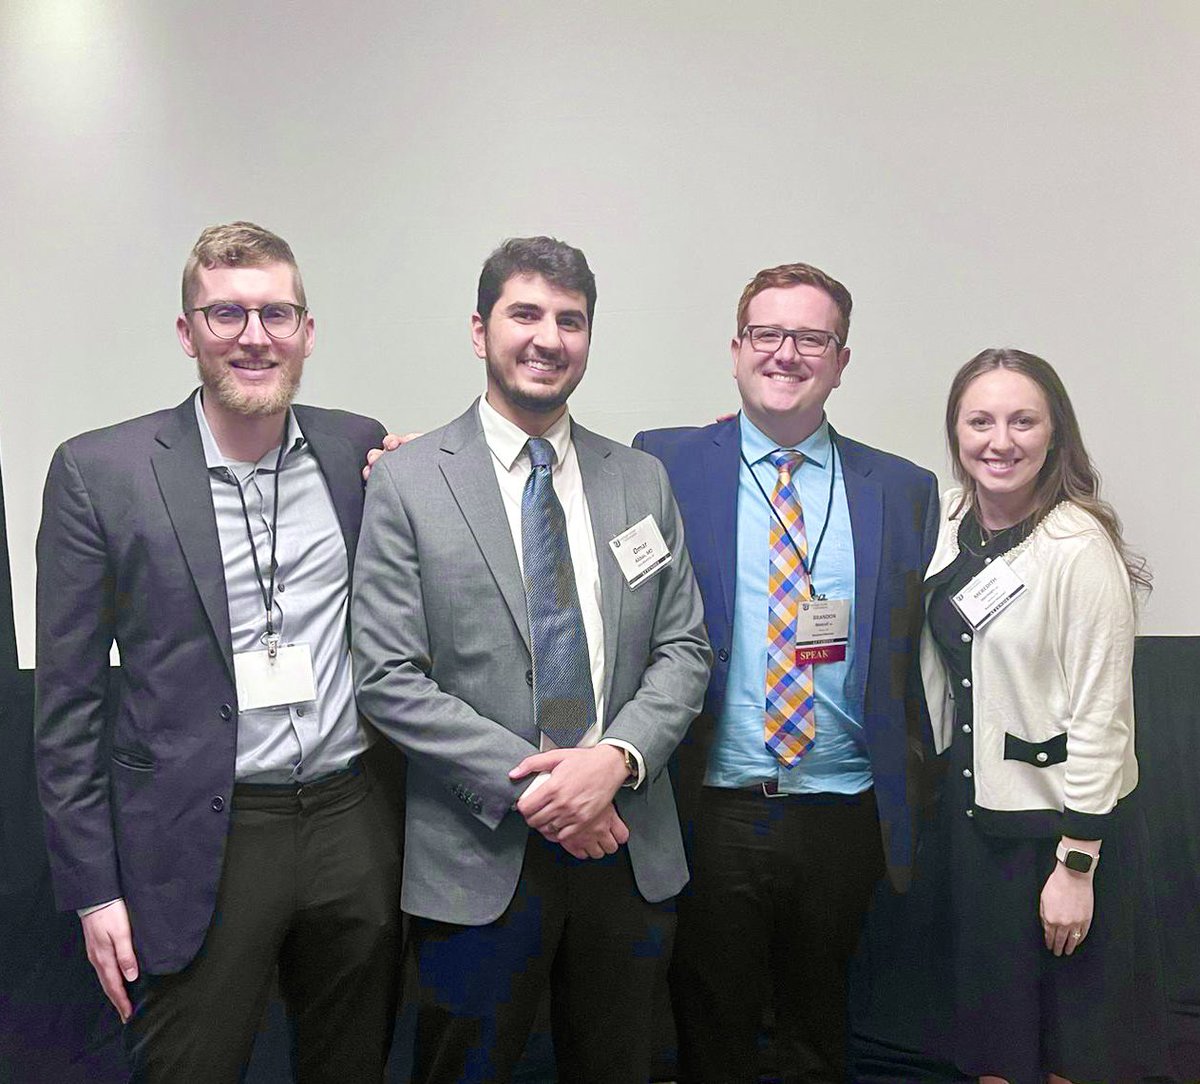 #MiSP resident forum leaders & members (missing just a few!) representing the interests of #pathresidents and #medicalstudents in the state of Michigan #PathX 1st year in the books!